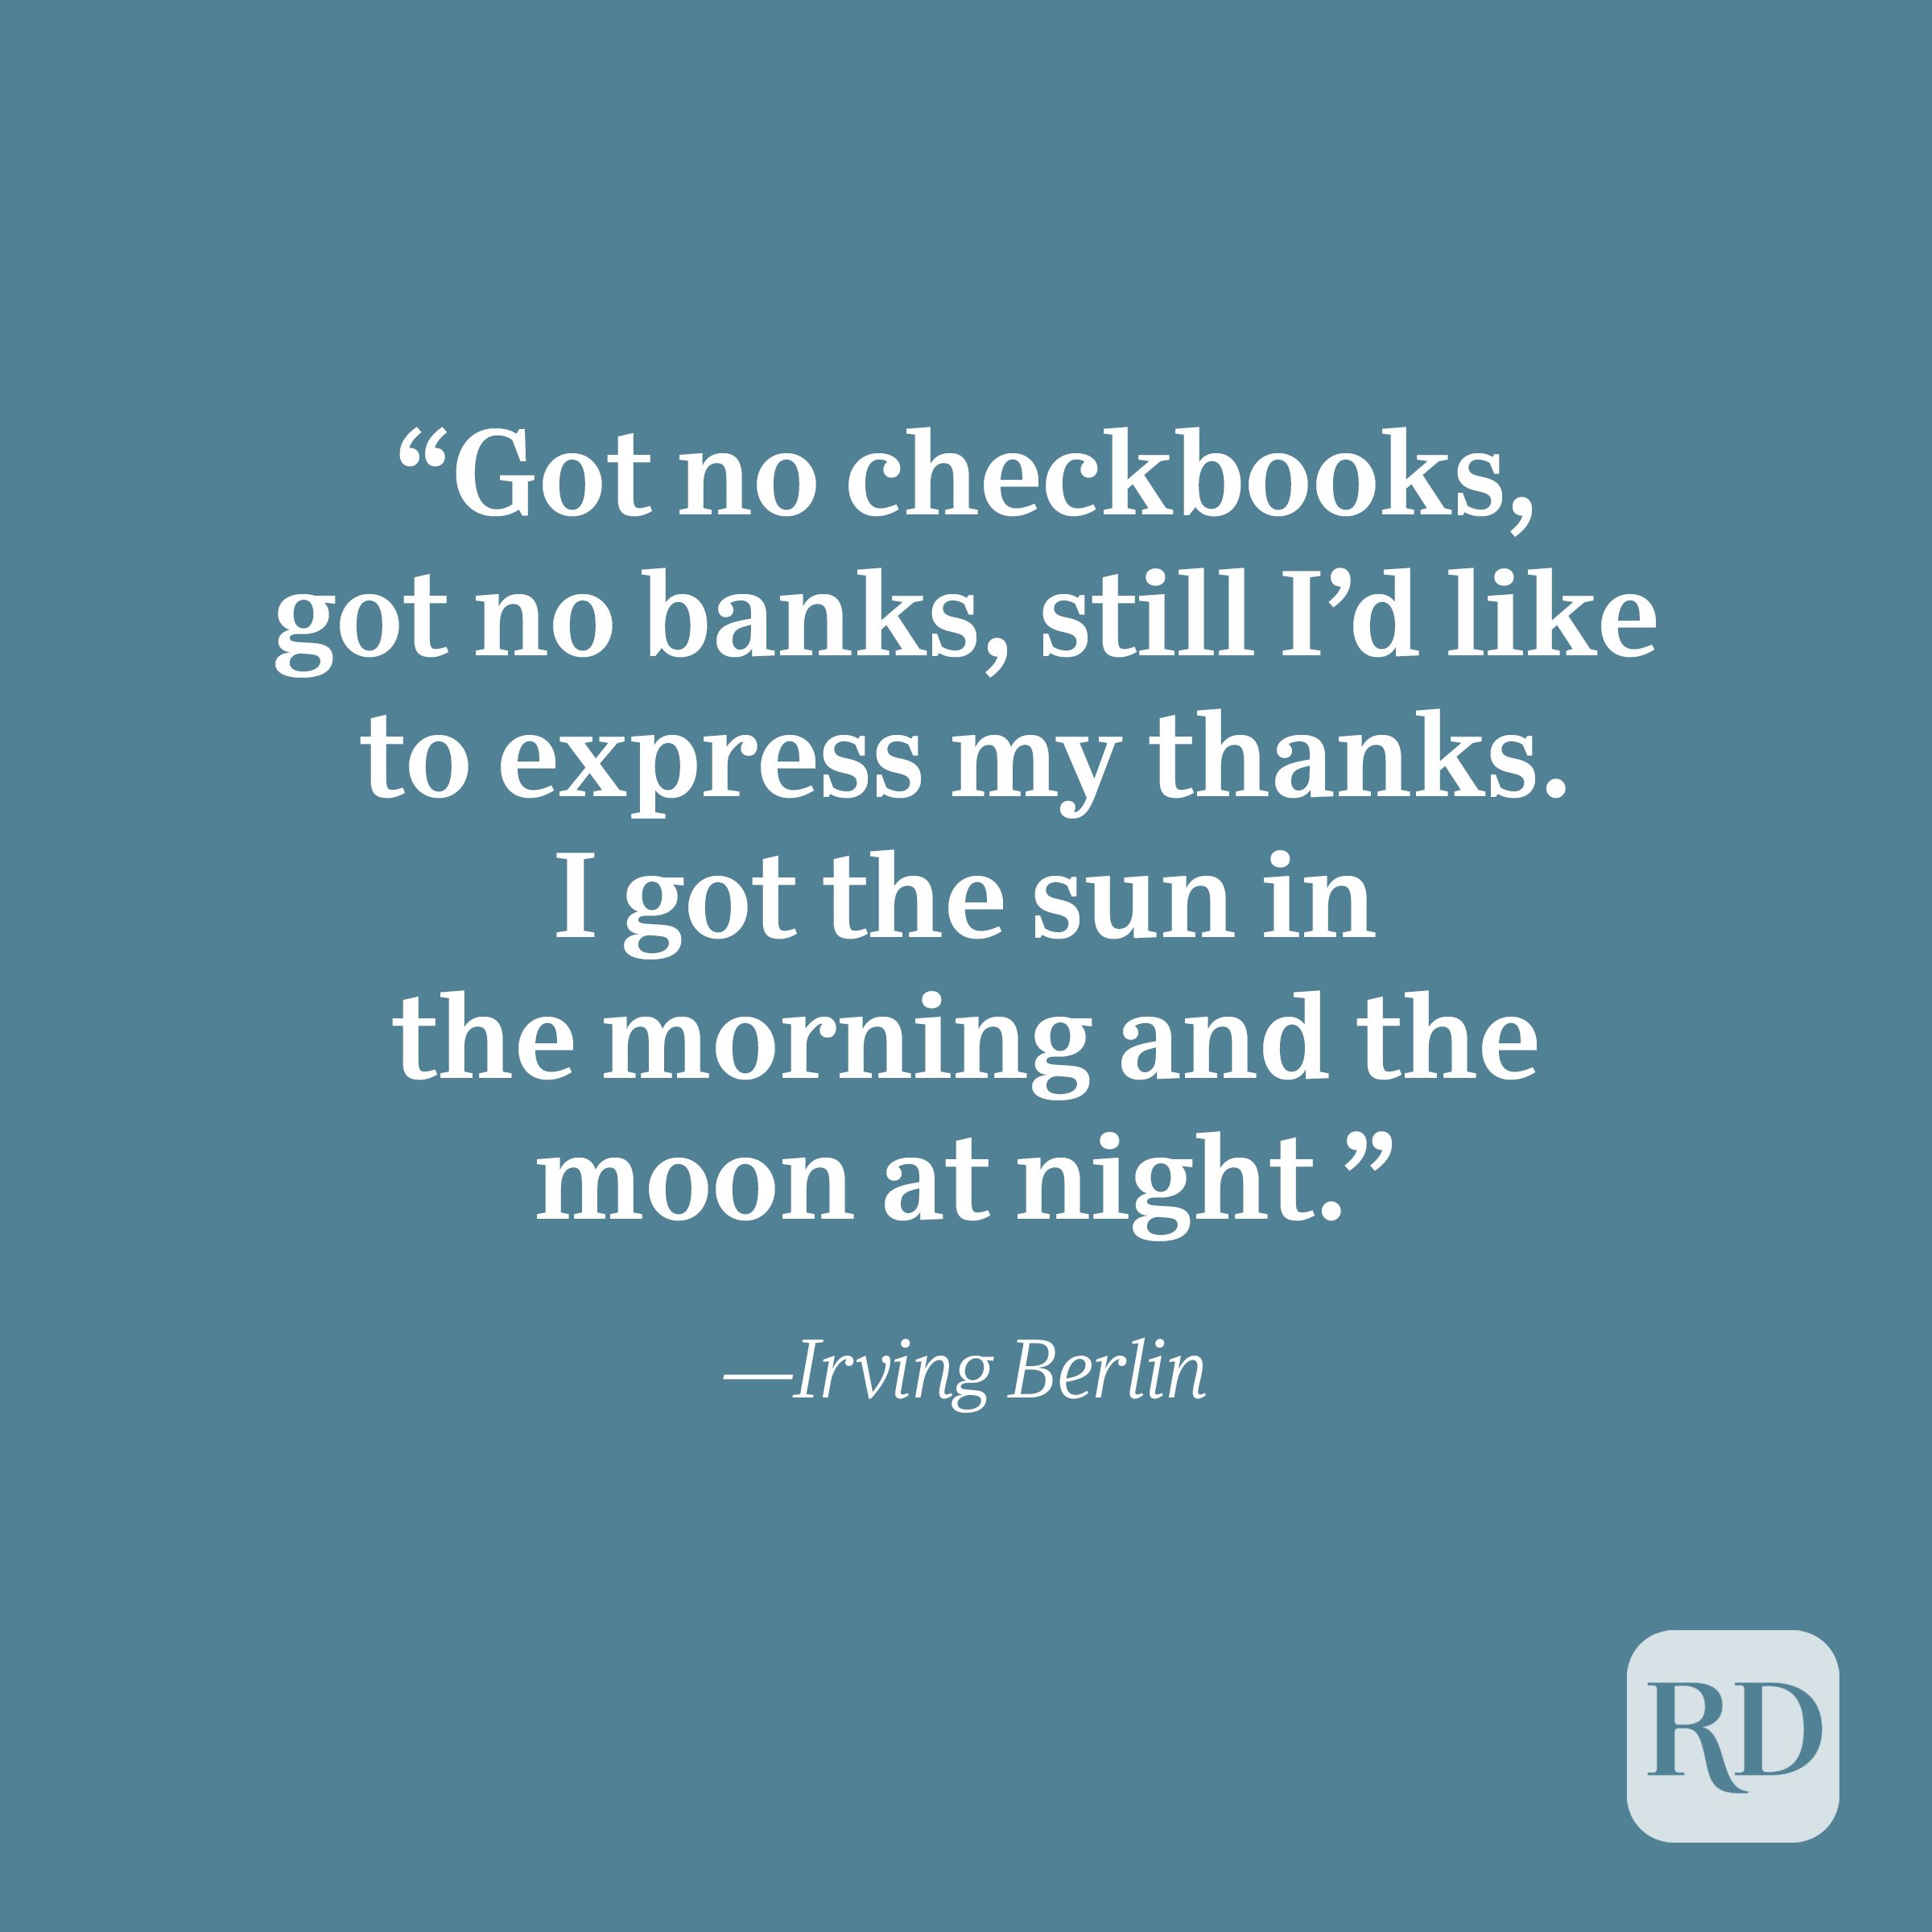 Irving Berlin quote about gratitude.